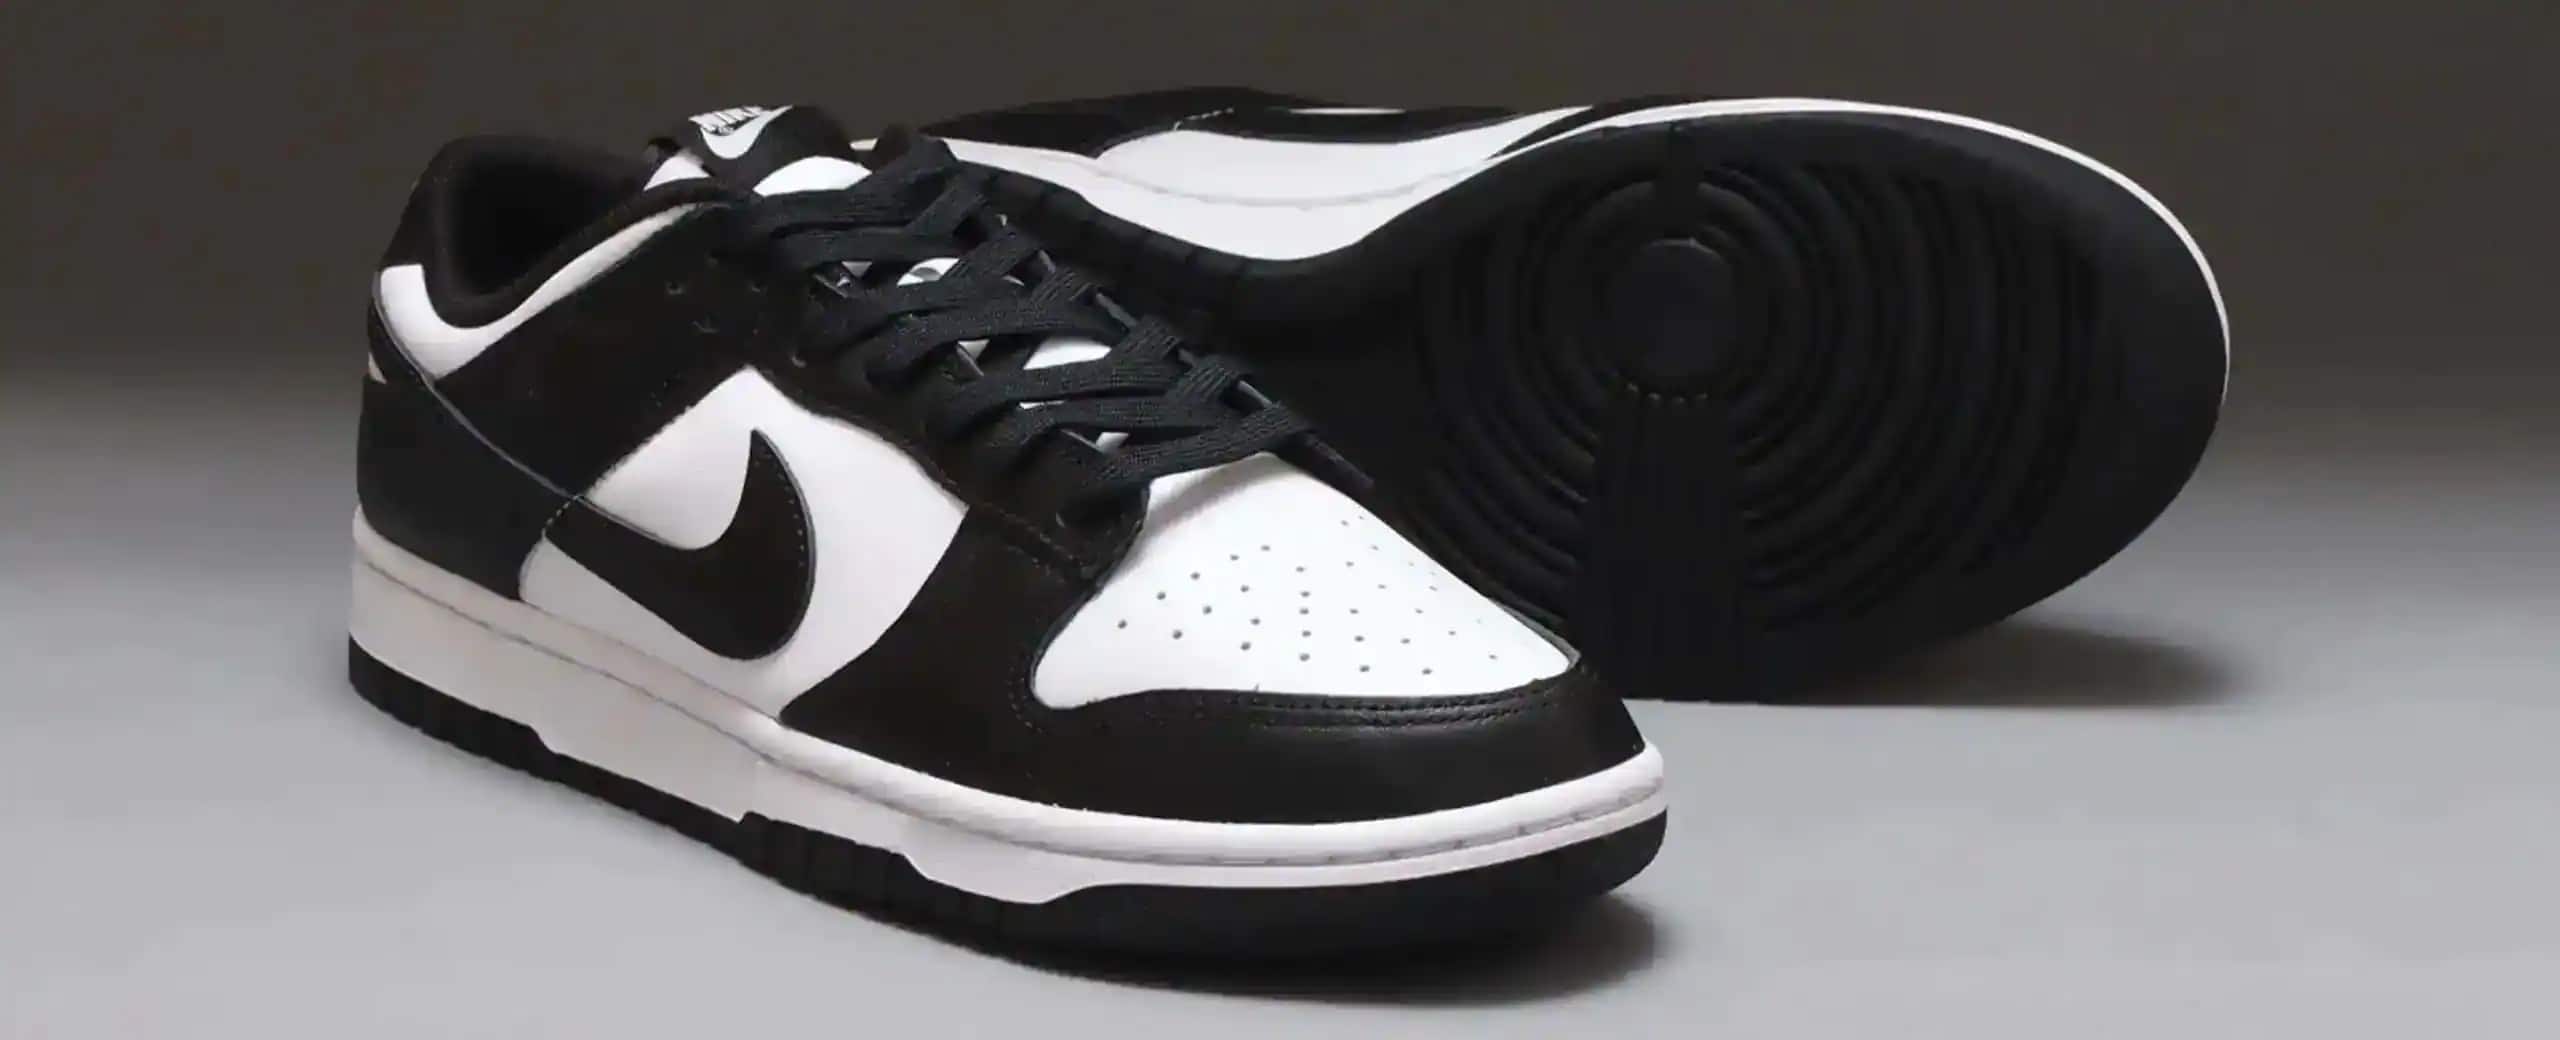 Nike and Dunk Low "Black/White" 26.5